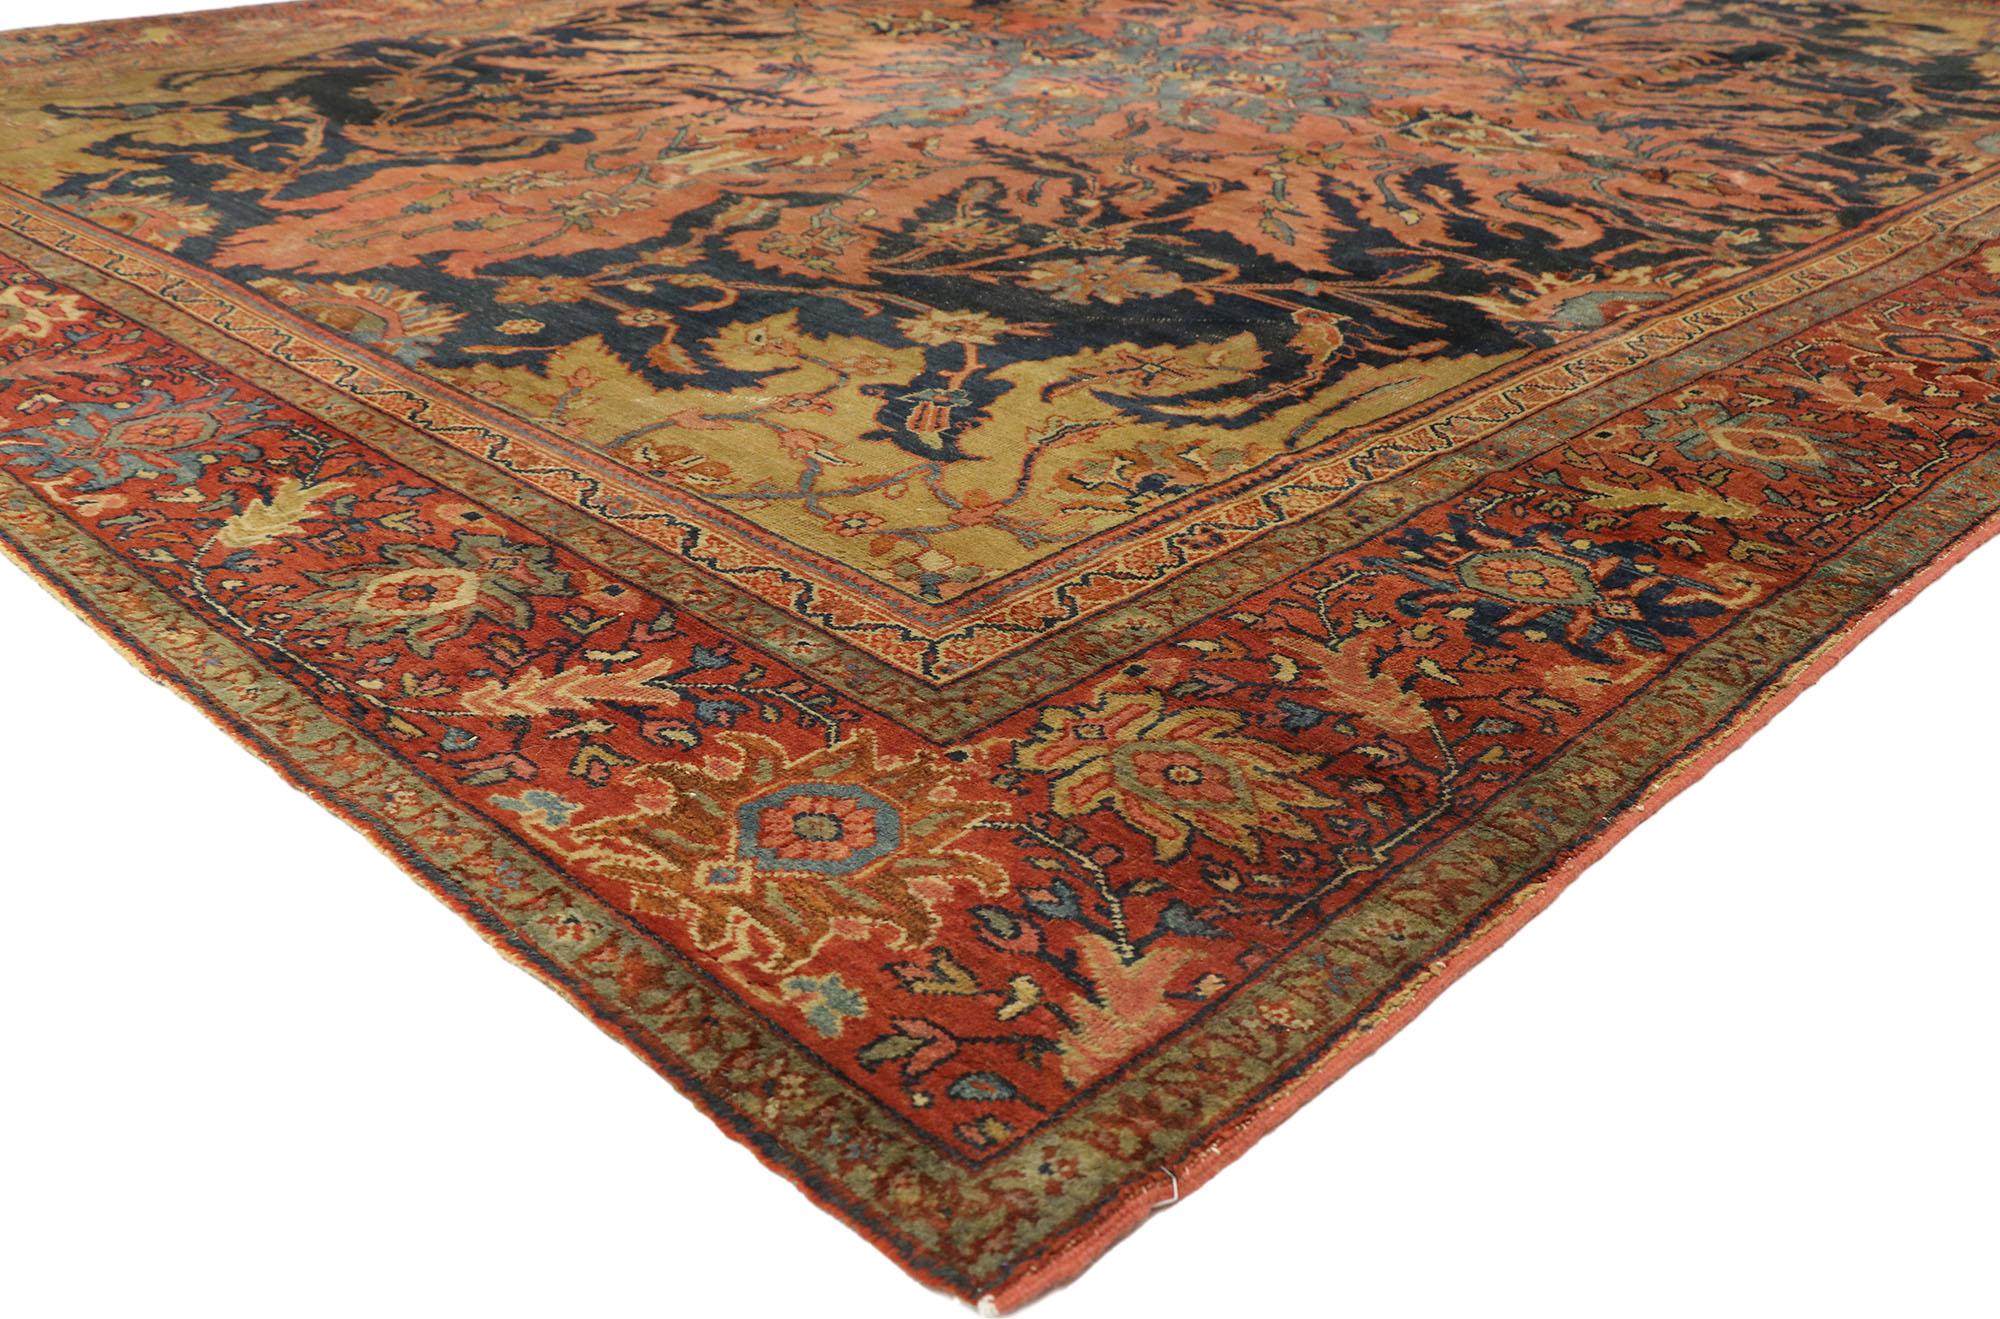 76816, distressed antique Persian Farahan rug with modern rustic English style. Displaying rustic sensibility and a relaxed English style with a lovingly time-worn composition, this hand knotted wool distressed antique Persian Farahan rug is